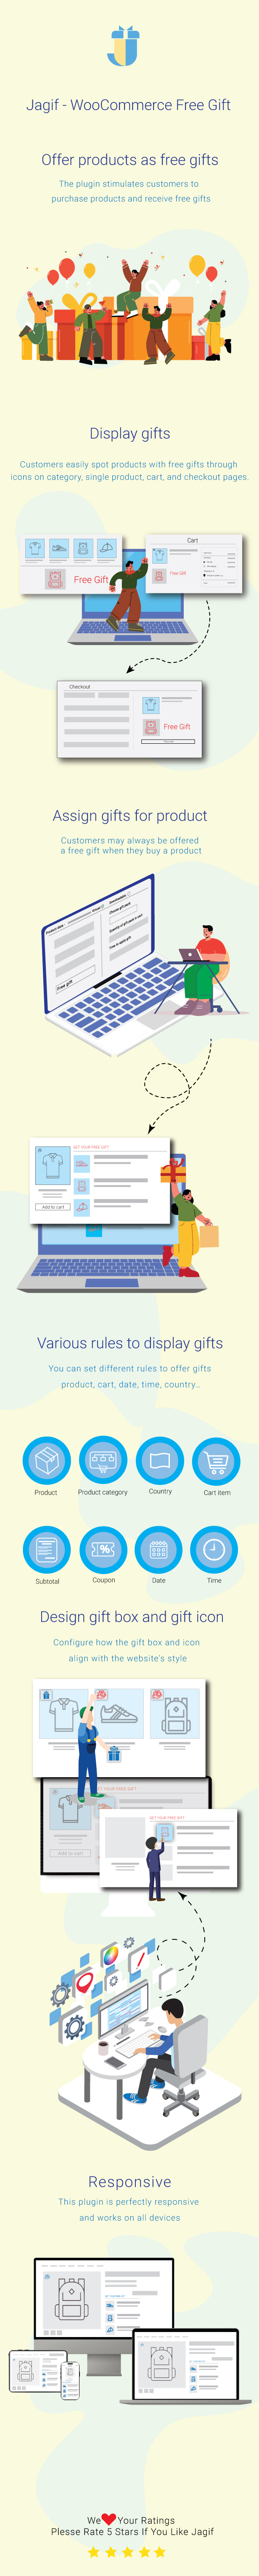 Your Guide for Free-Gifts to Increase Your Sales — MerchantYard